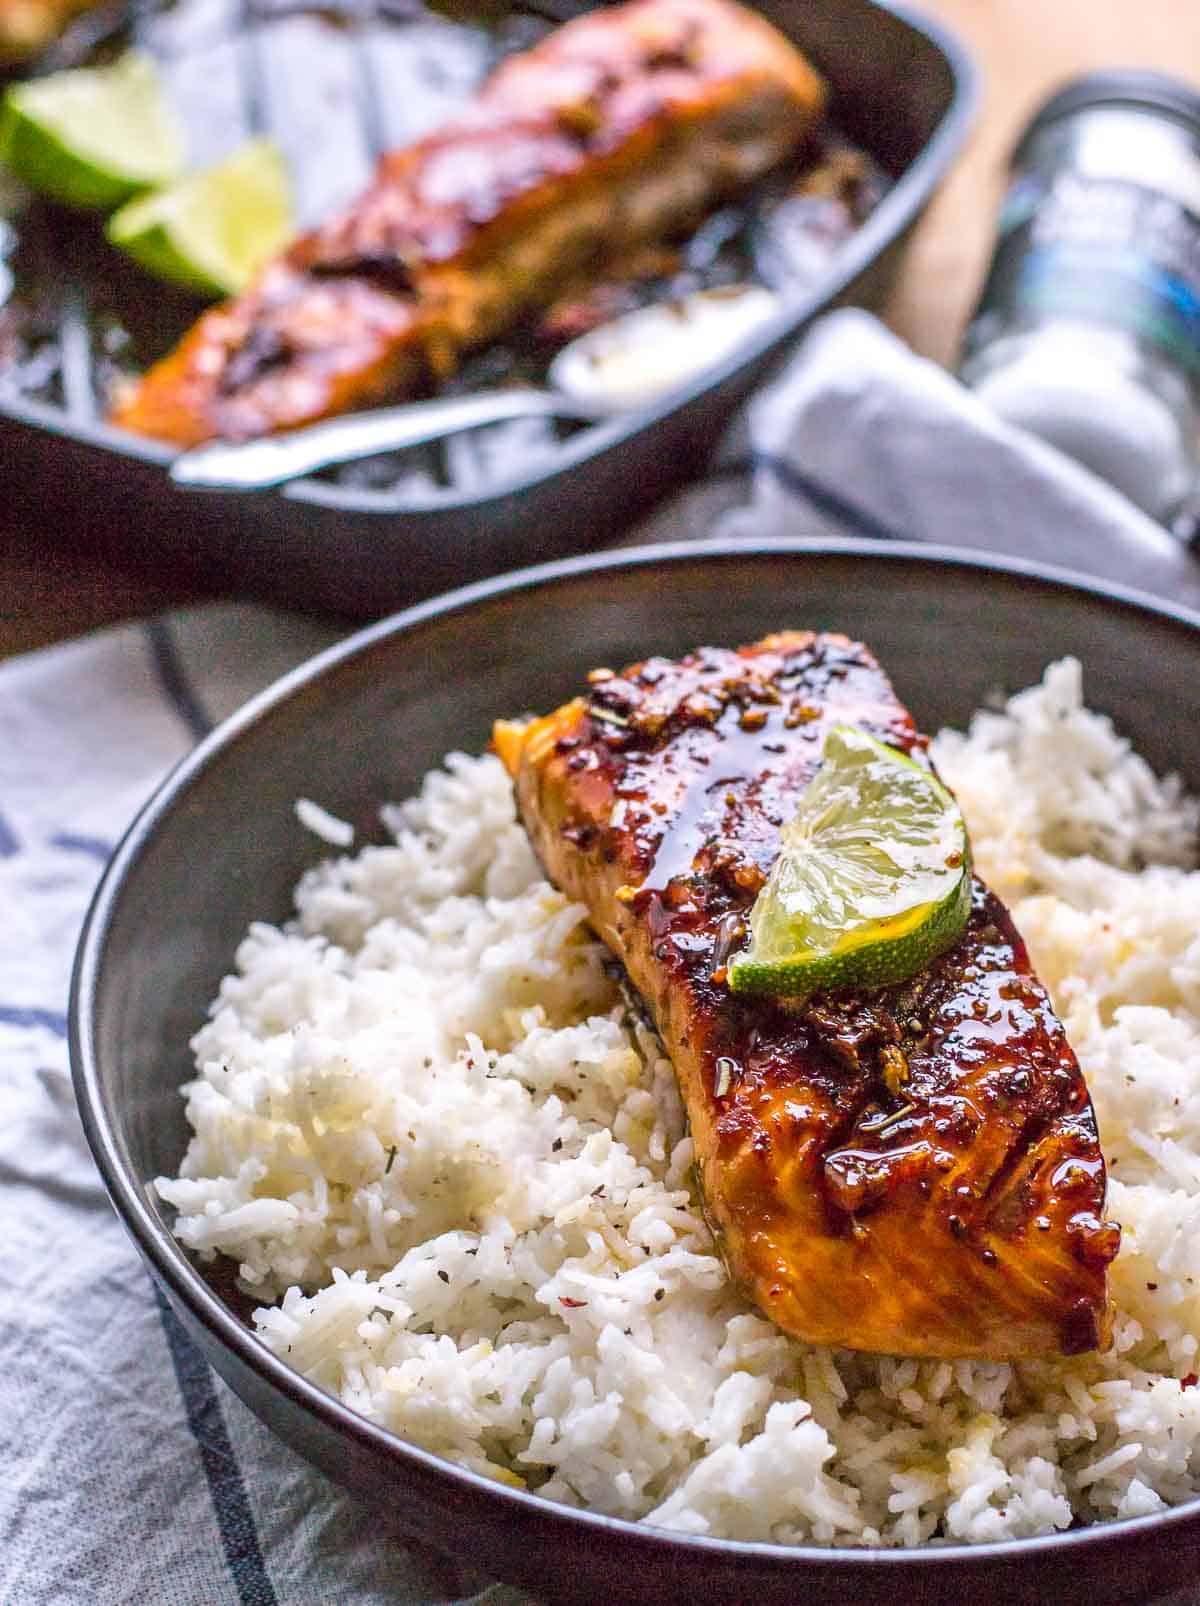 Honey garlic salmon with a lime slice on top served over a bed of rice in a black bowl with a bottle of spice and skillet on the side